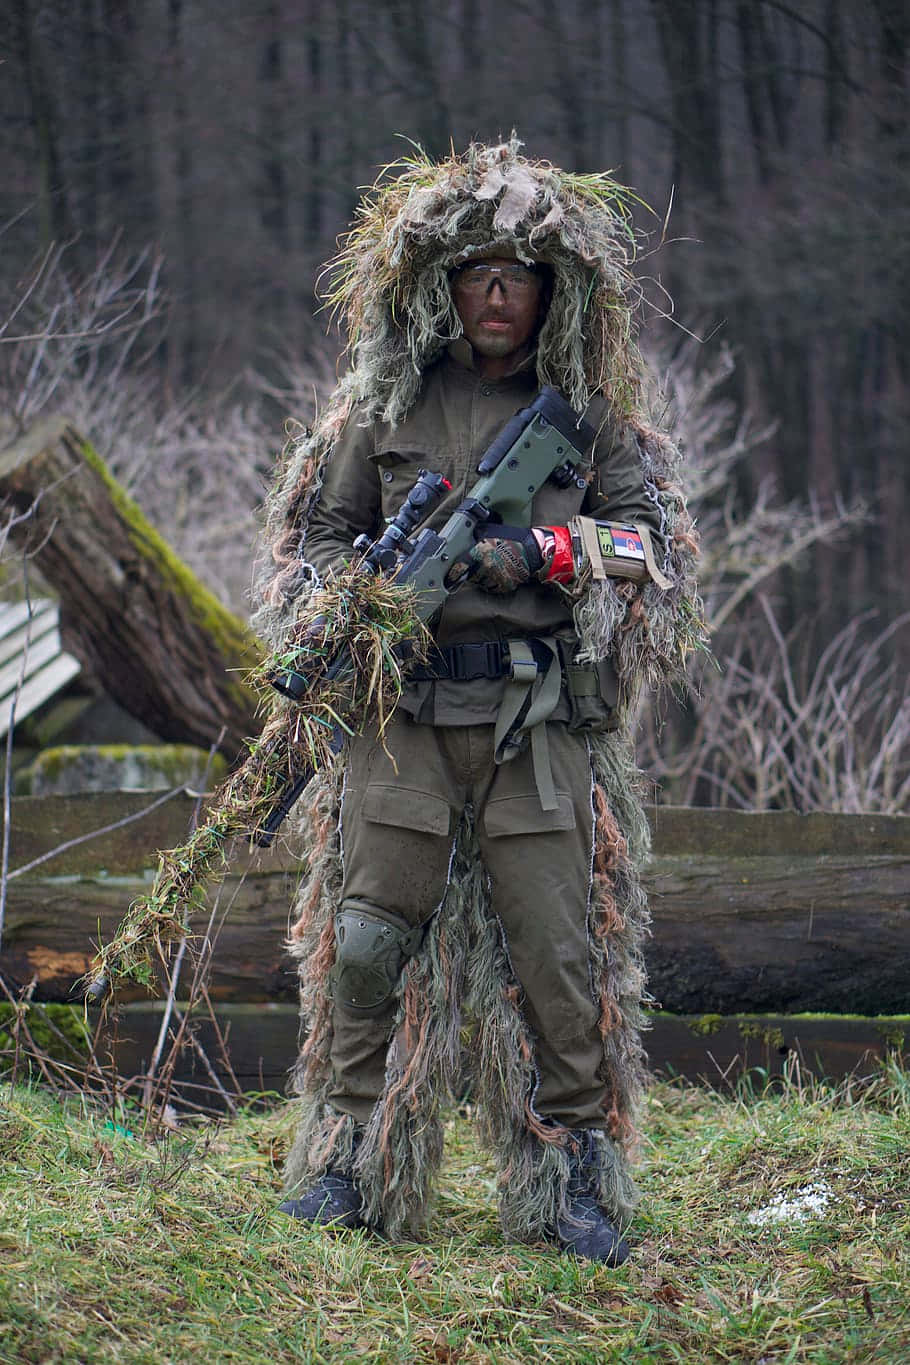 Sniper_in_ Ghillie_ Suit_with_ Rifle.jpg Wallpaper